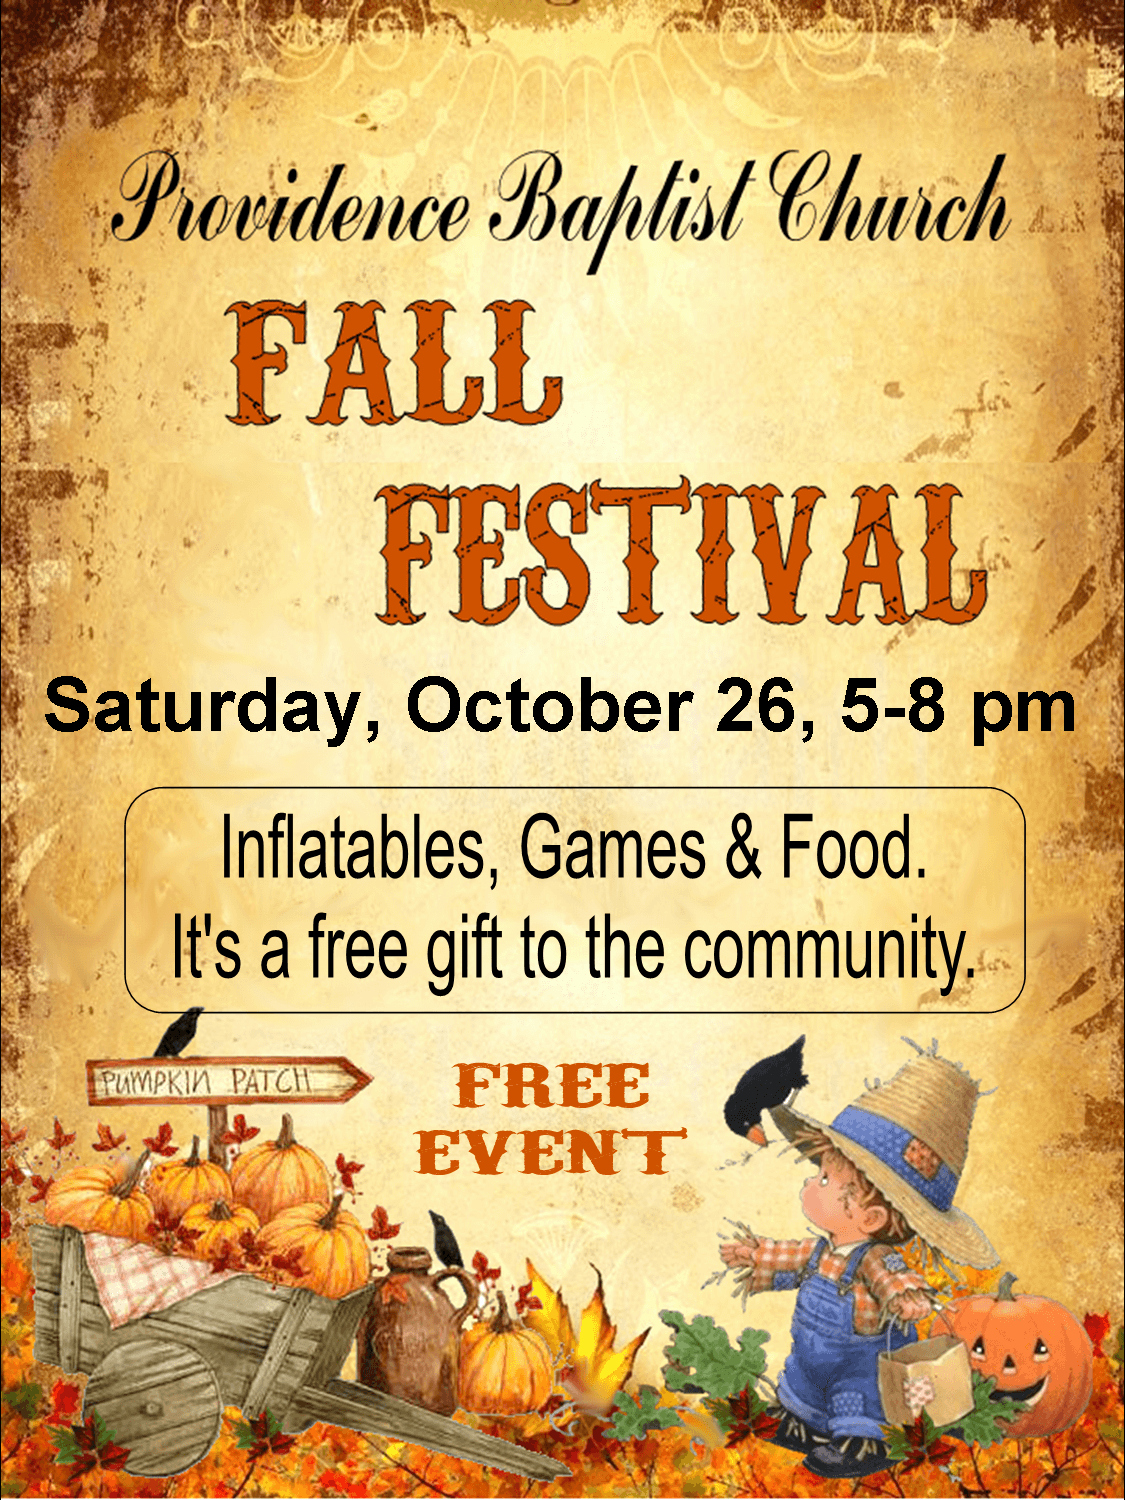 Free Church Flyer Templates Inspirational Providence Baptist Church Invites Everyone Out to their